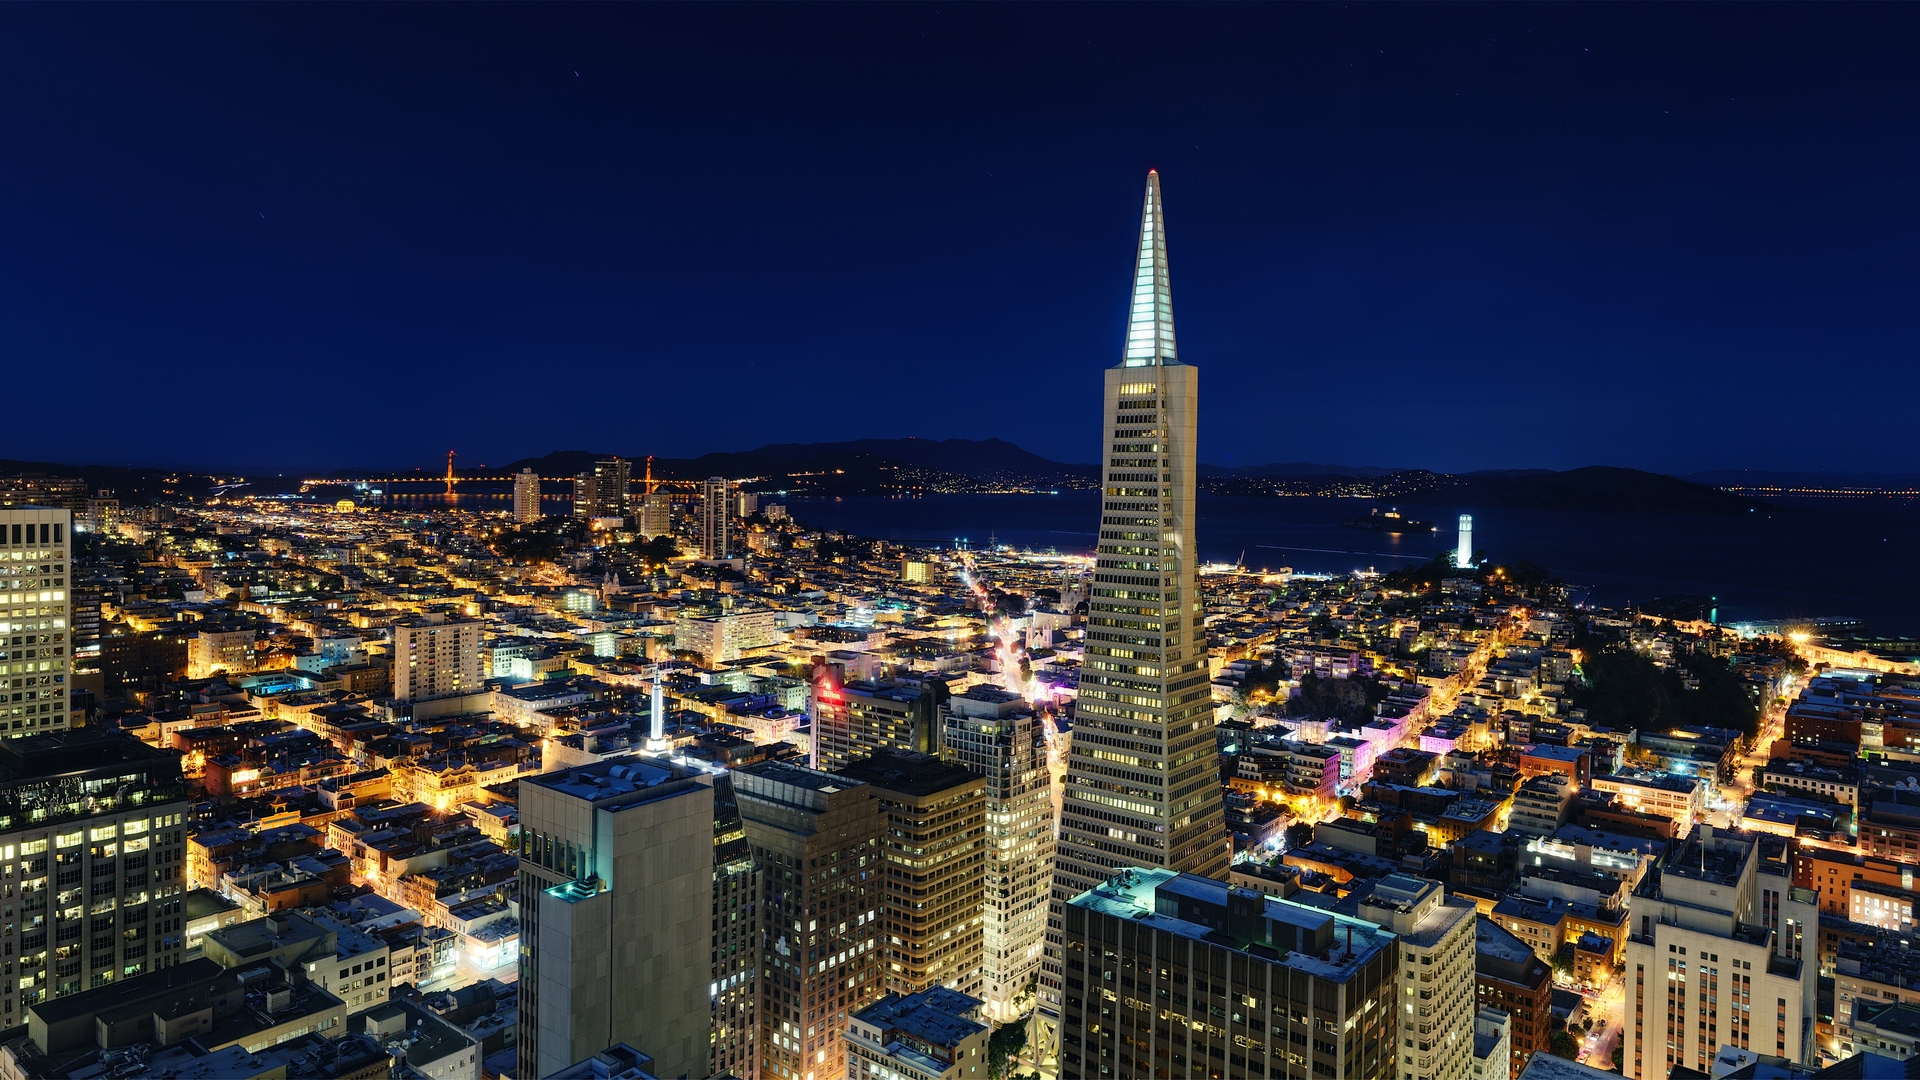 Night in San Francisco for 1920 x 1080 HDTV 1080p resolution